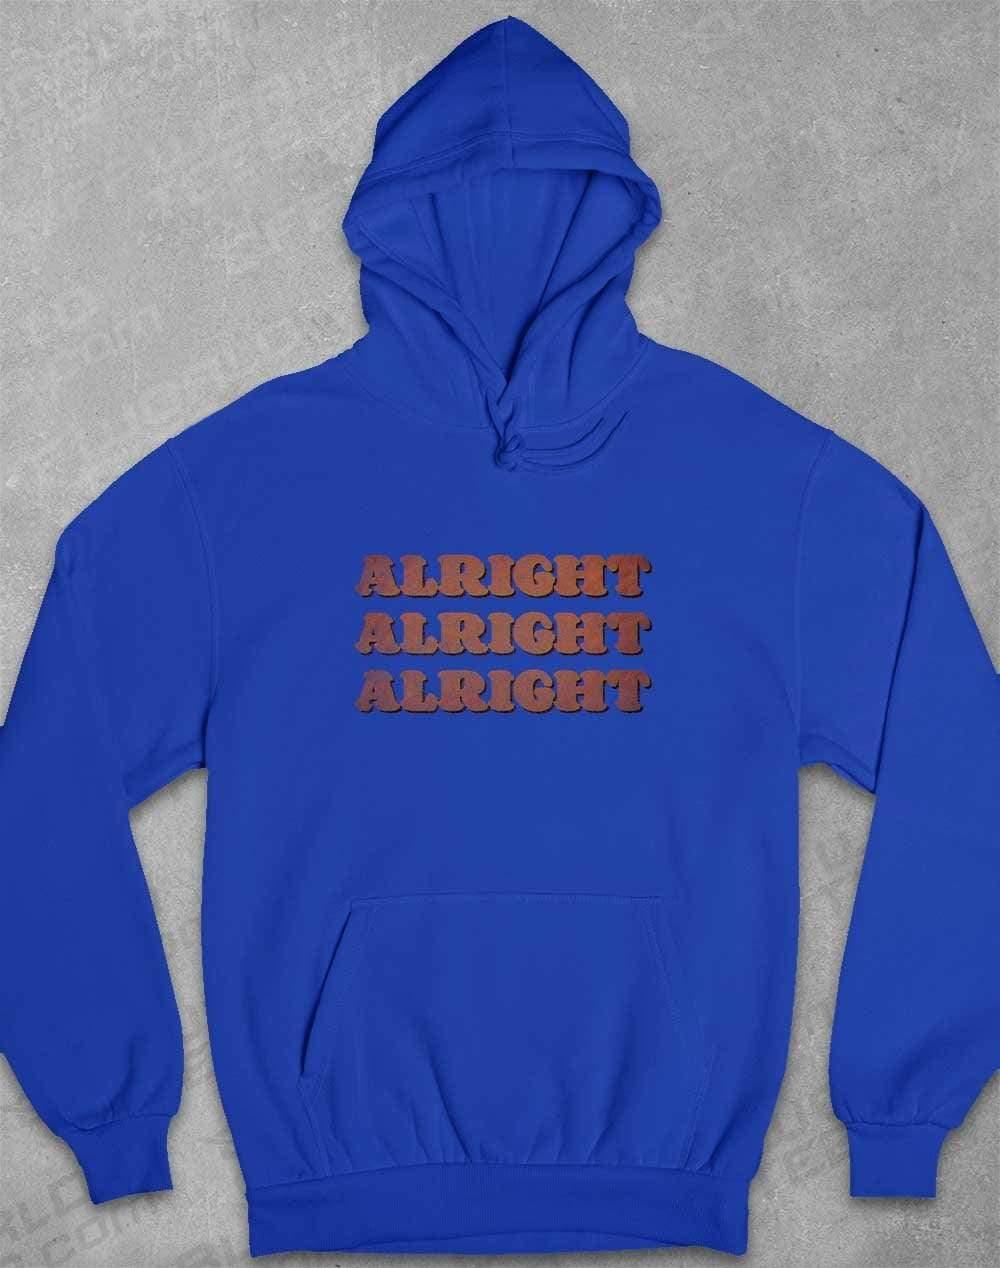 Alright Alright Alright Hoodie XS / Royal Blue  - Off World Tees